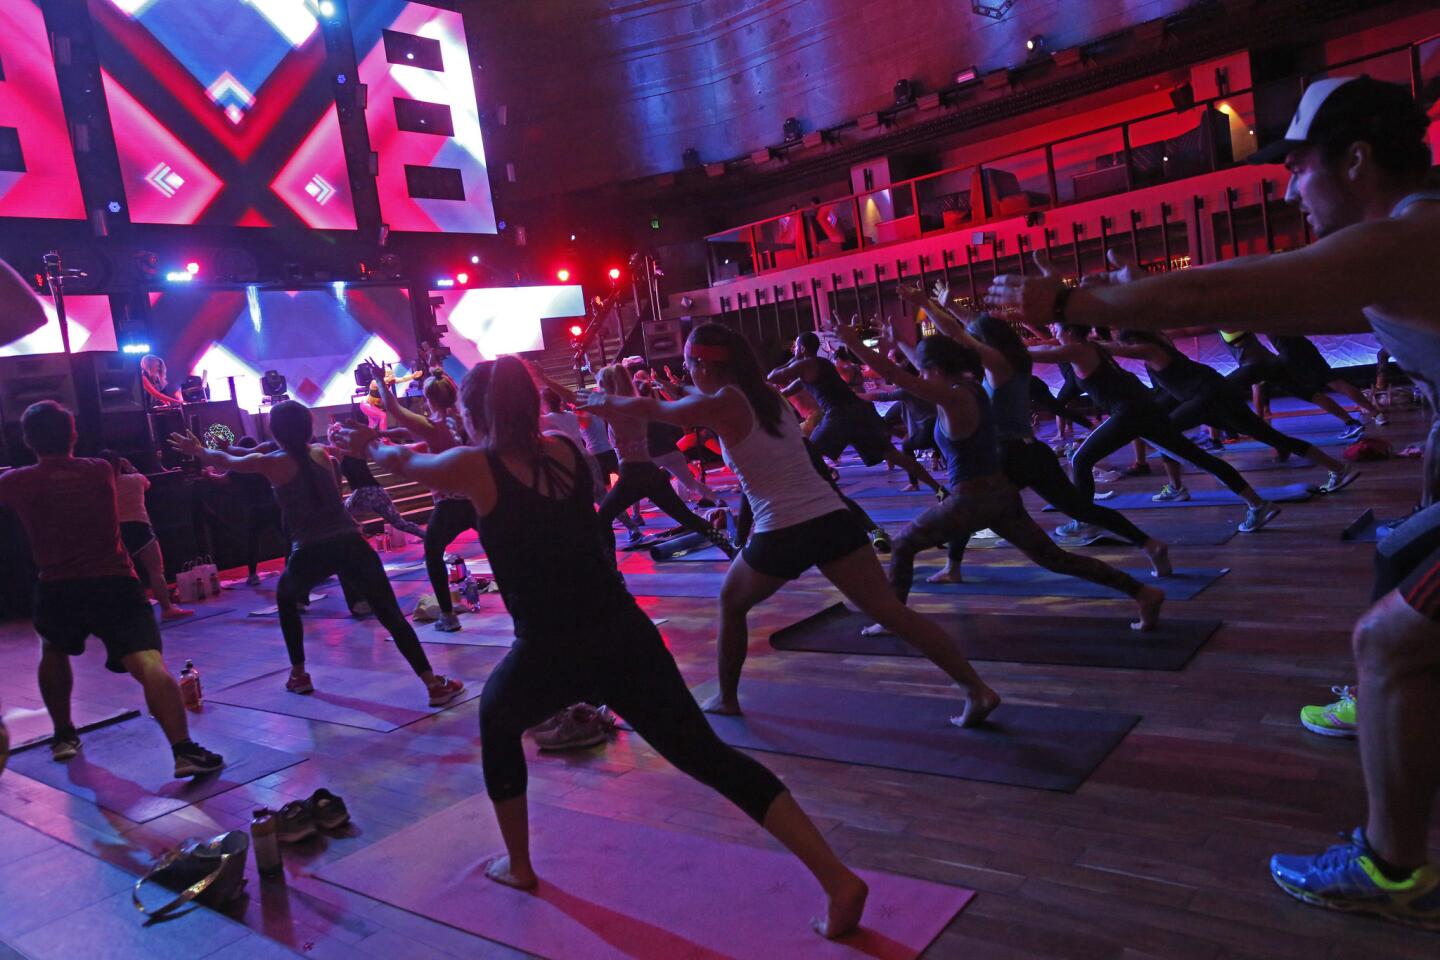 This workout is like a rave, mashing up fitness with art - Los